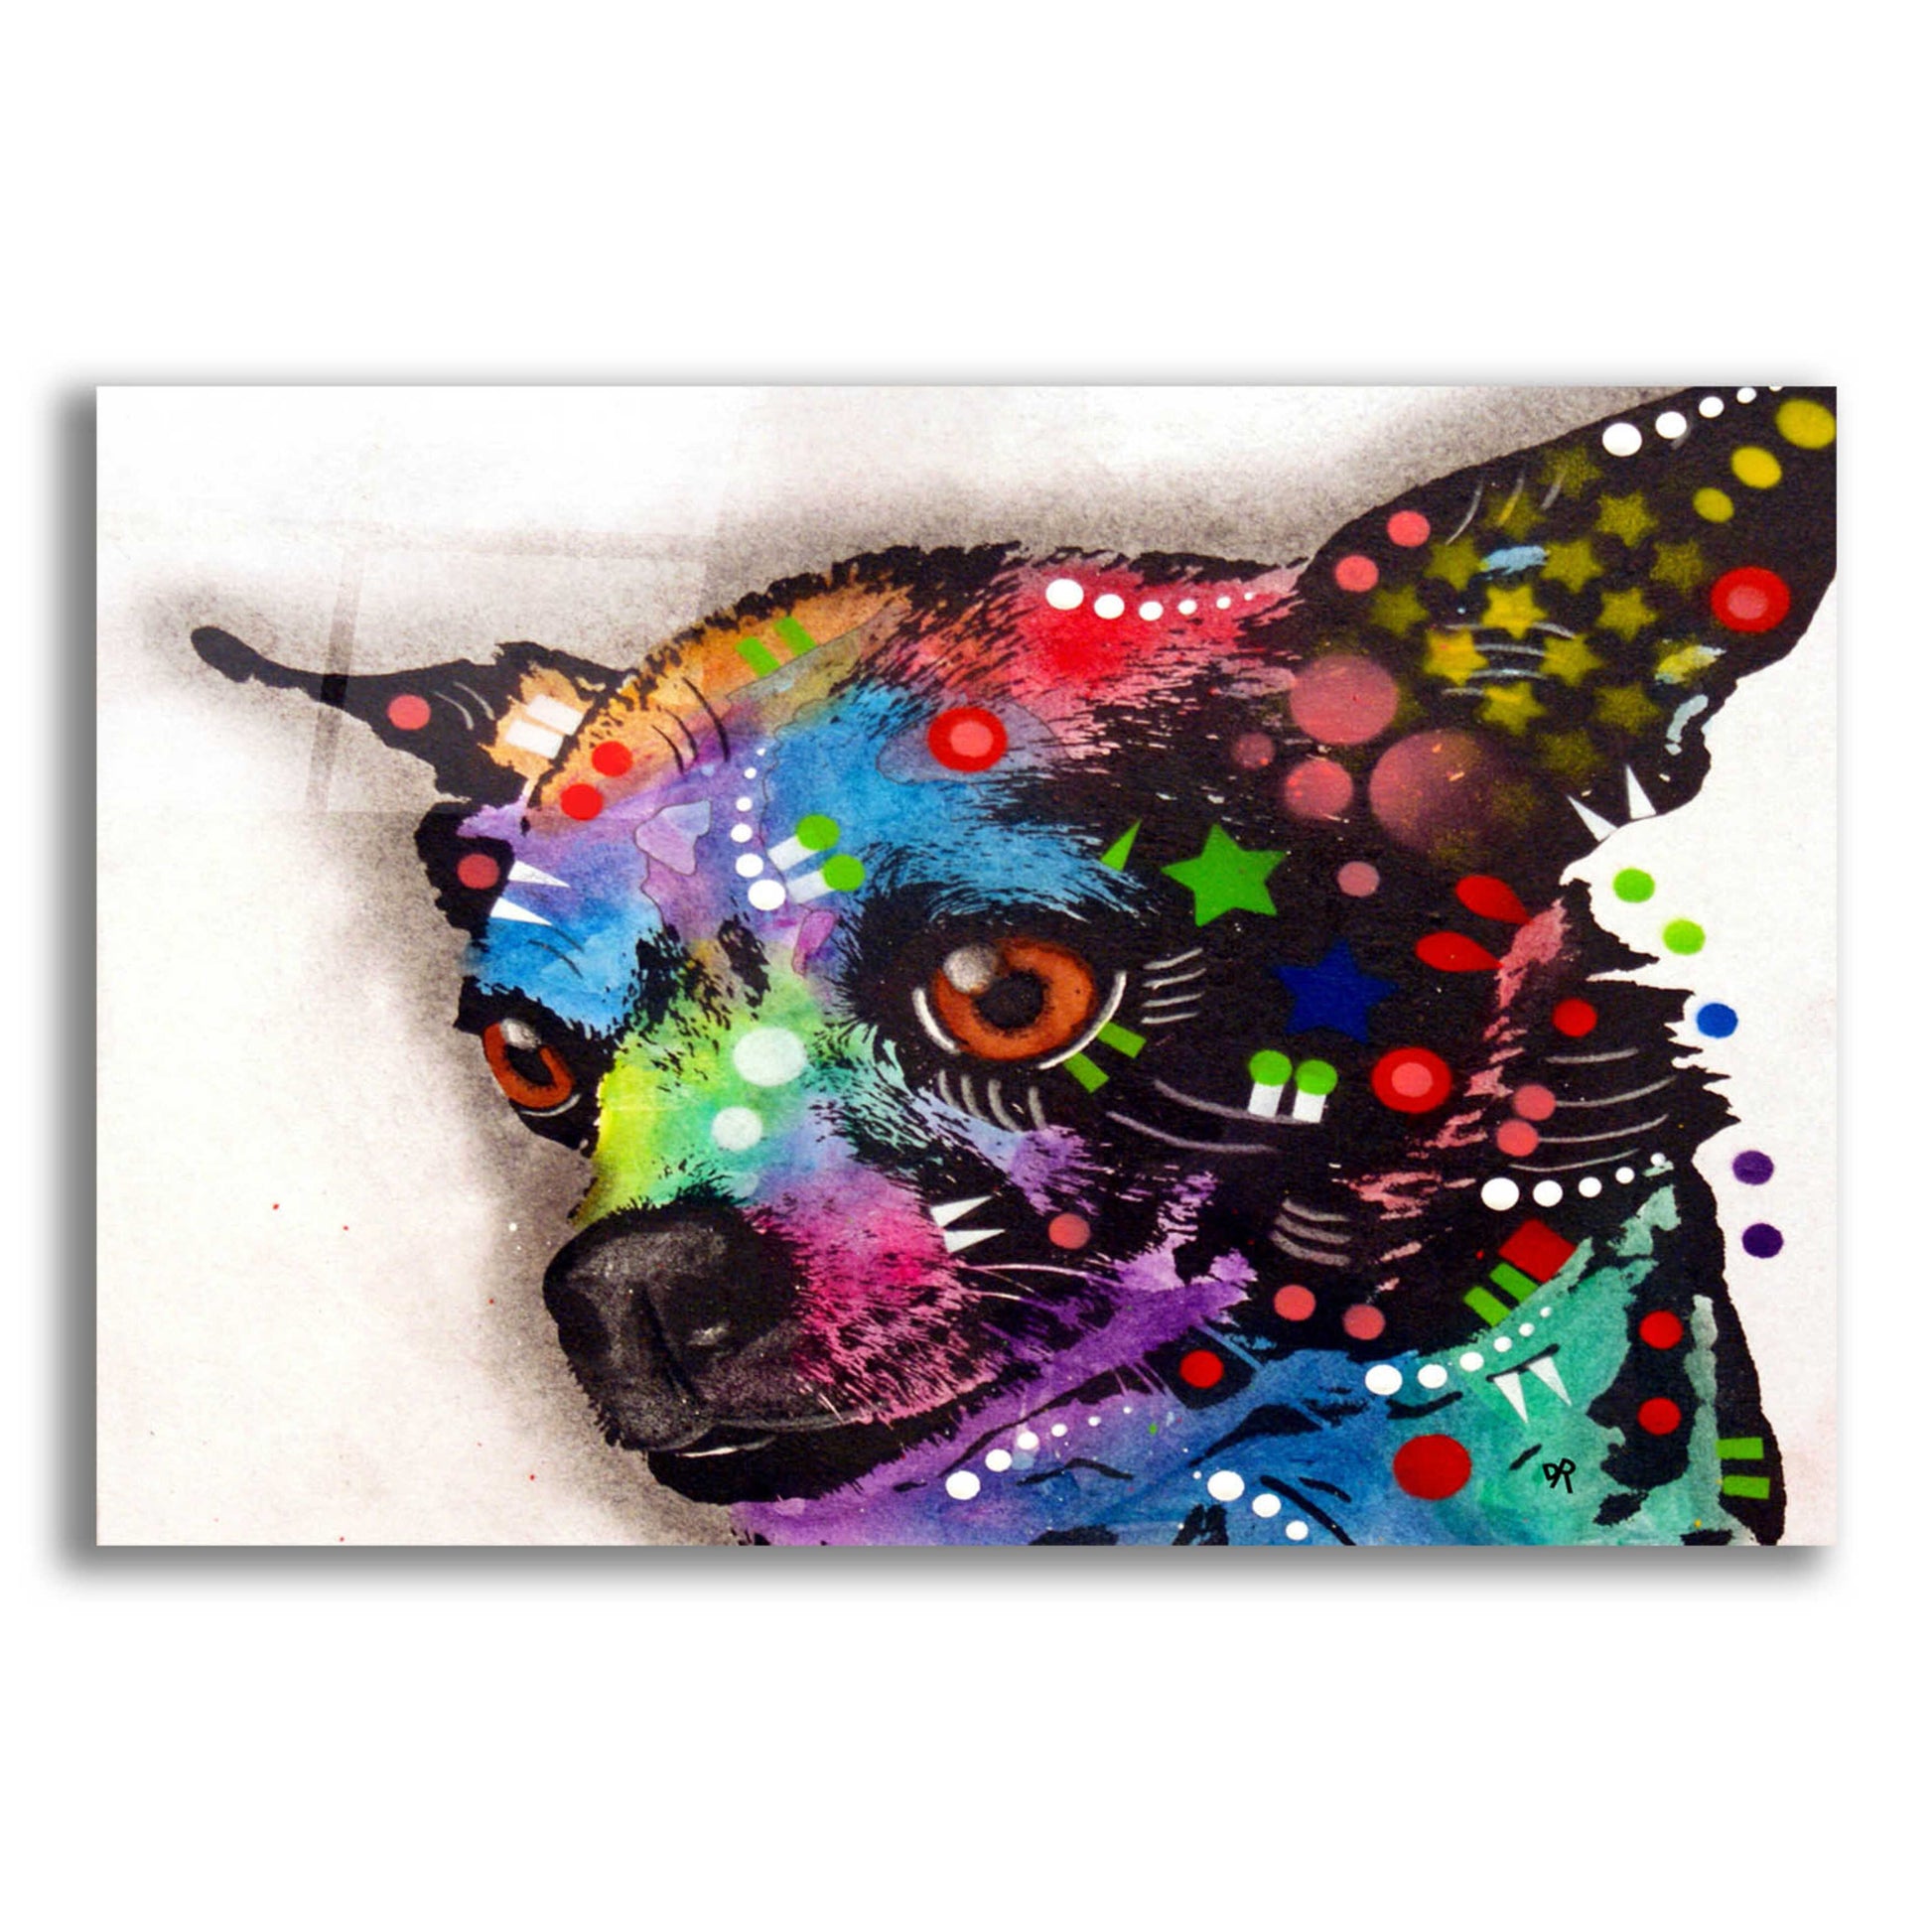 Epic Art 'CHICHI' by Dean Russo, Acrylic Glass Wall Art,16x12